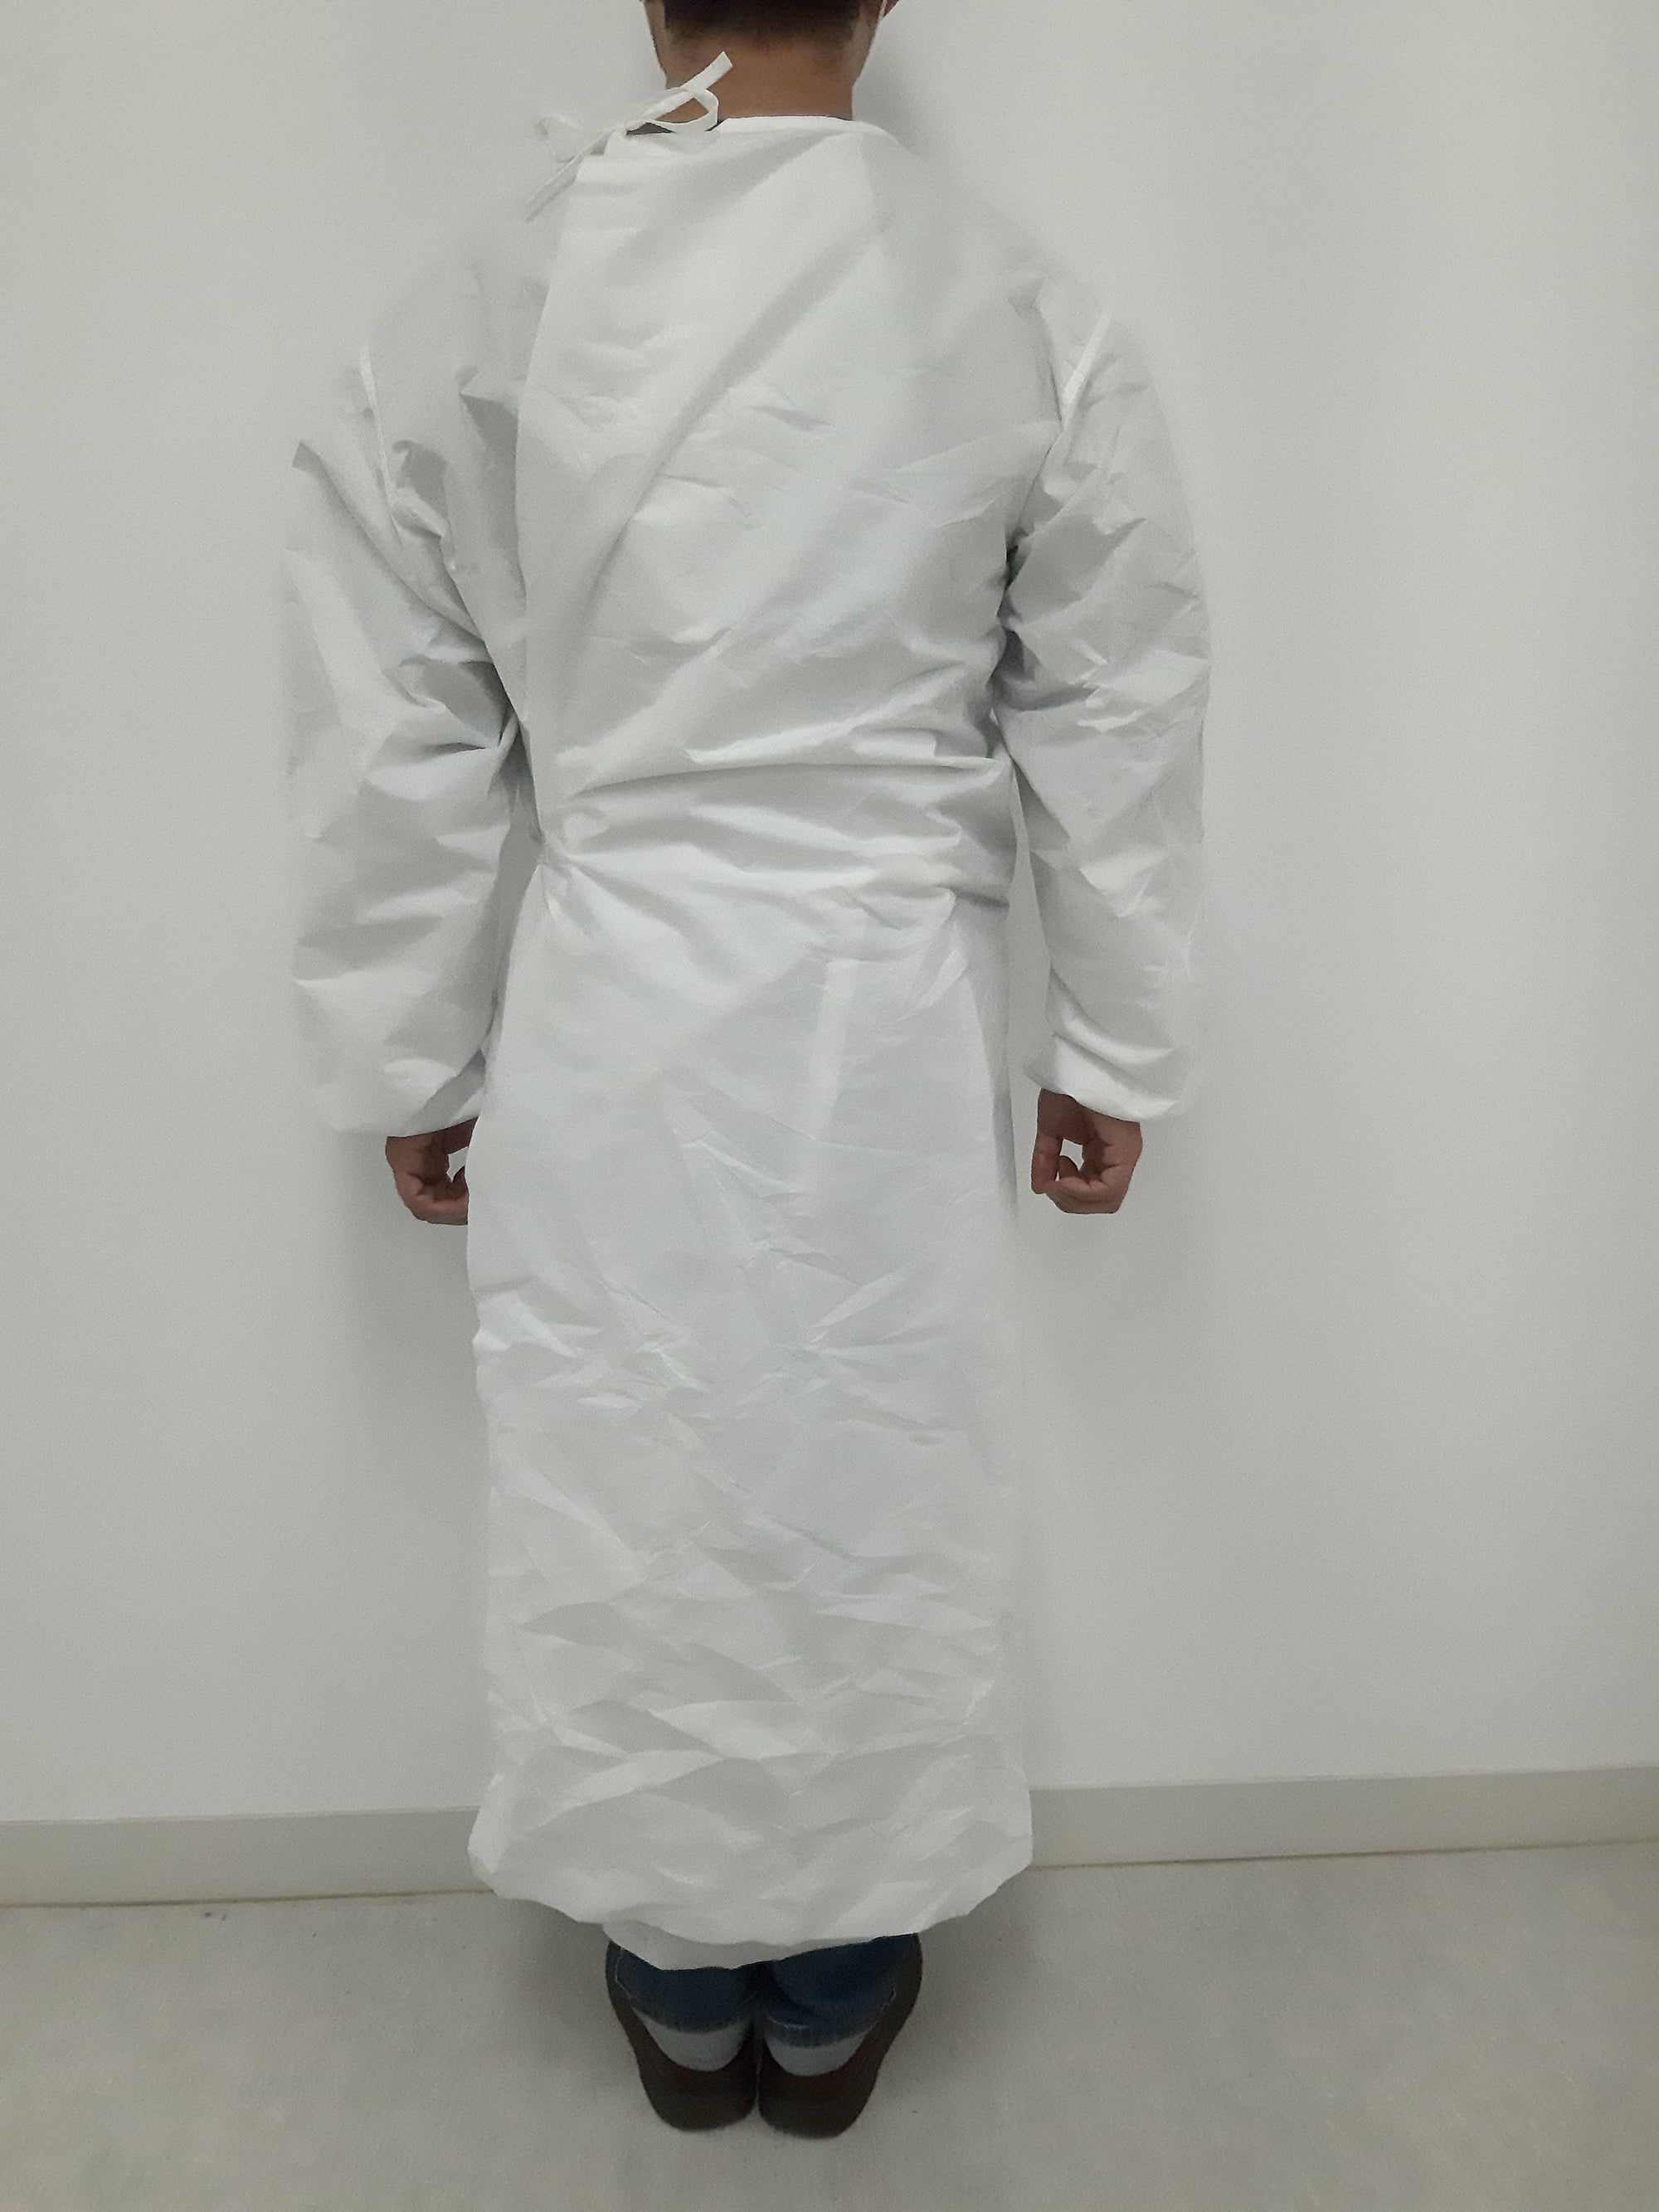 Shield-N Isolation Gown / Made in Vietnam